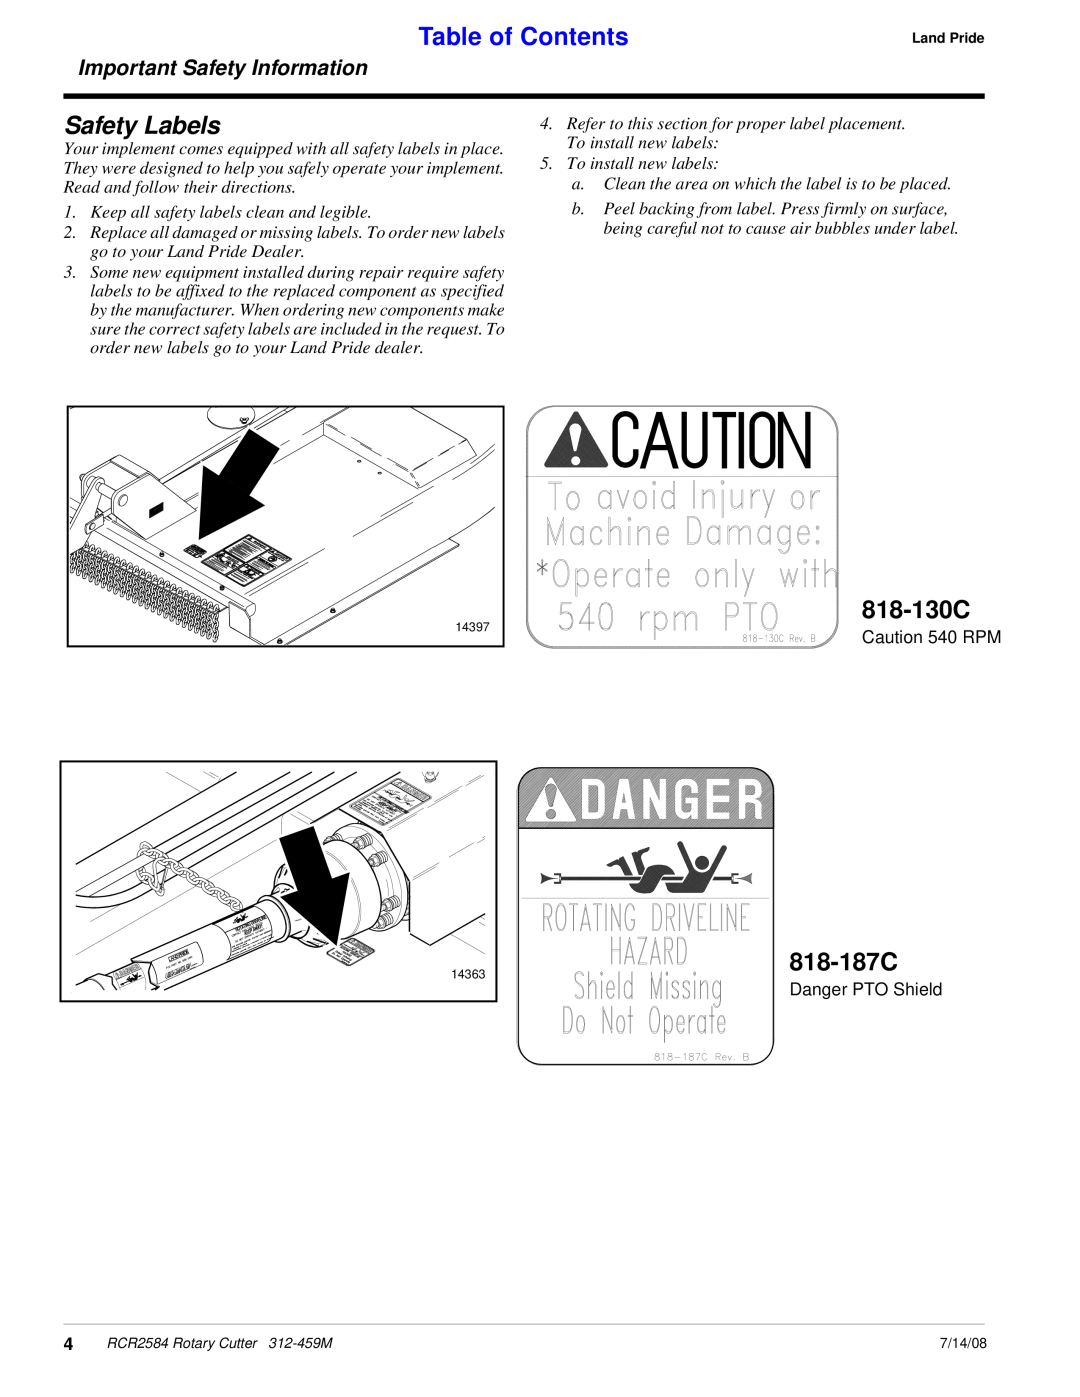 Land Pride RCR2584 818-130C, 818-187C, Keep all safety labels clean and legible, To install new labels, Table of Contents 